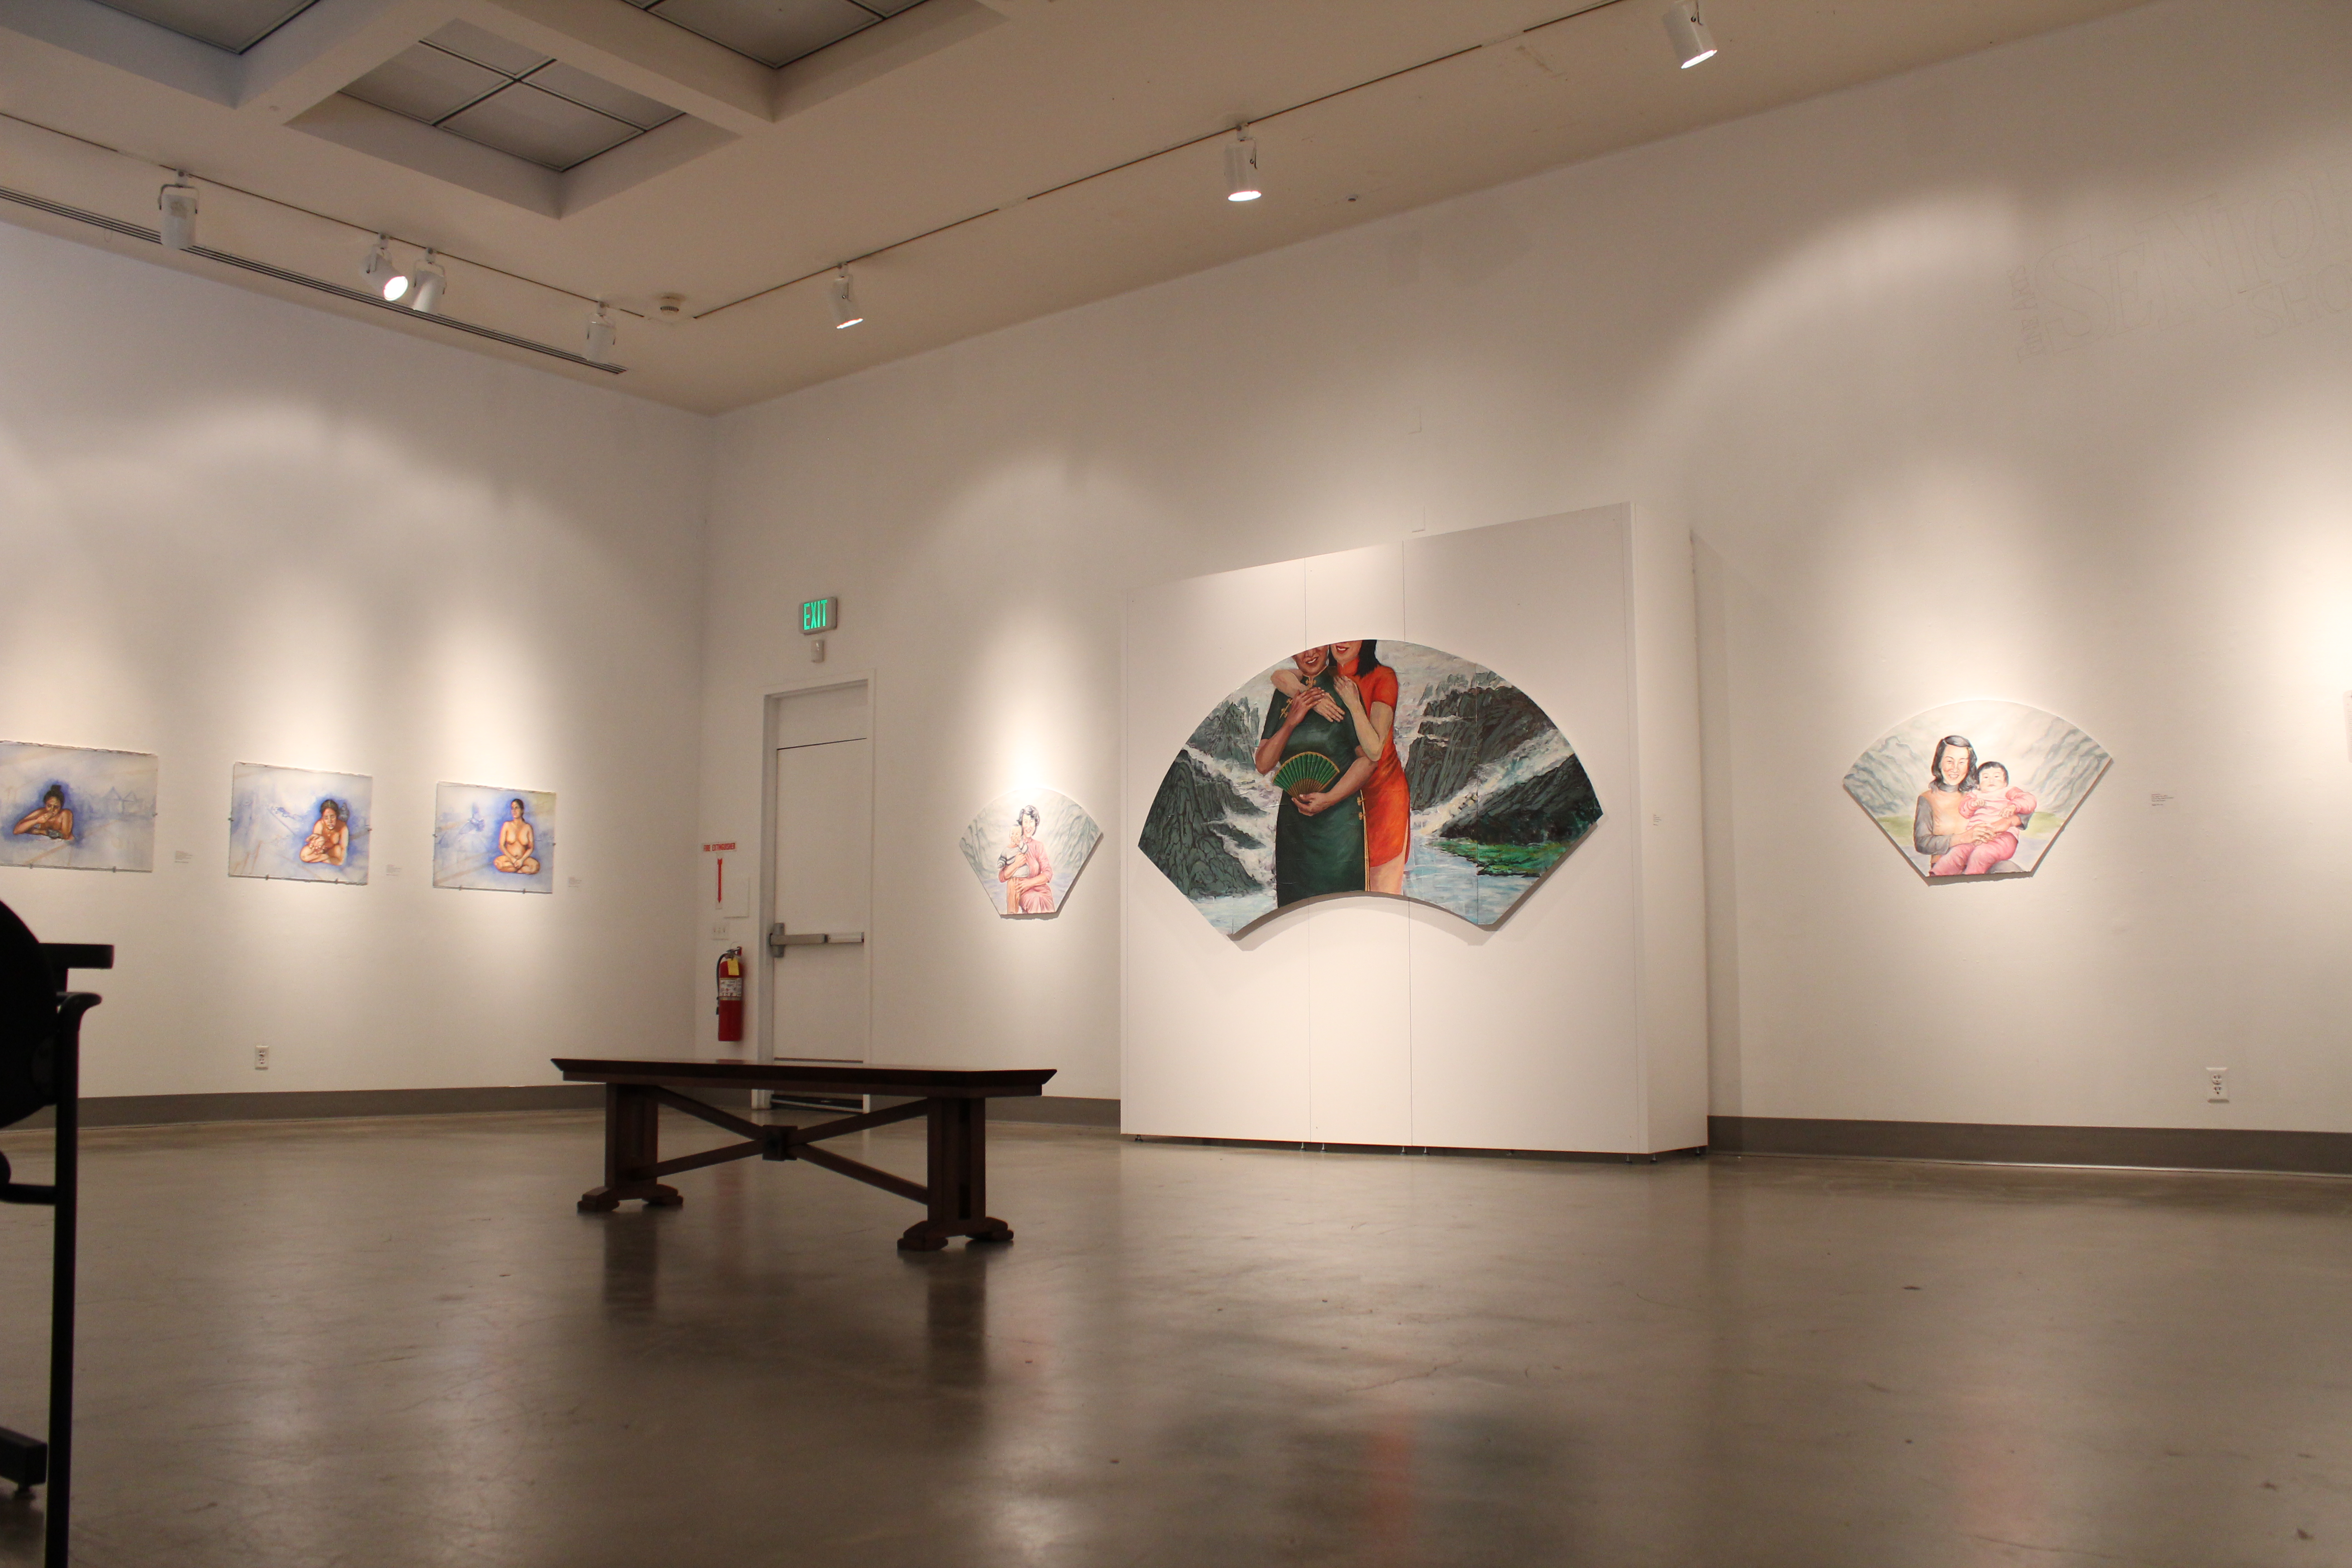 Installation View, Front East Gallery, Polykroma 2014 Exhibition, May. 19, 2014 to Jun. 15, 2014.